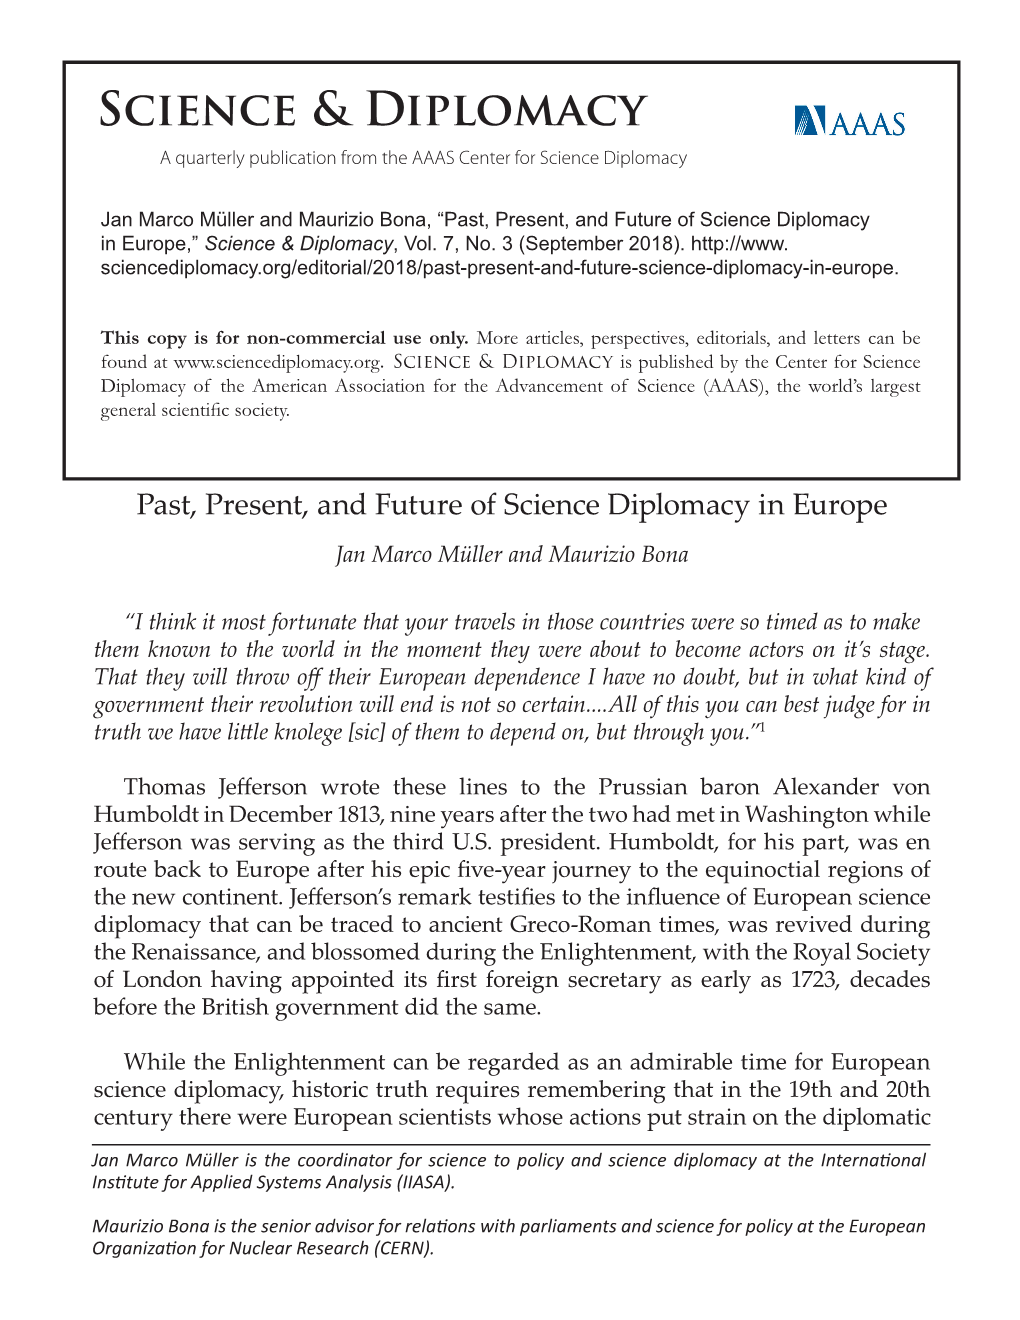 Past, Present, and Future of Science Diplomacy in Europe,” Science & Diplomacy, Vol